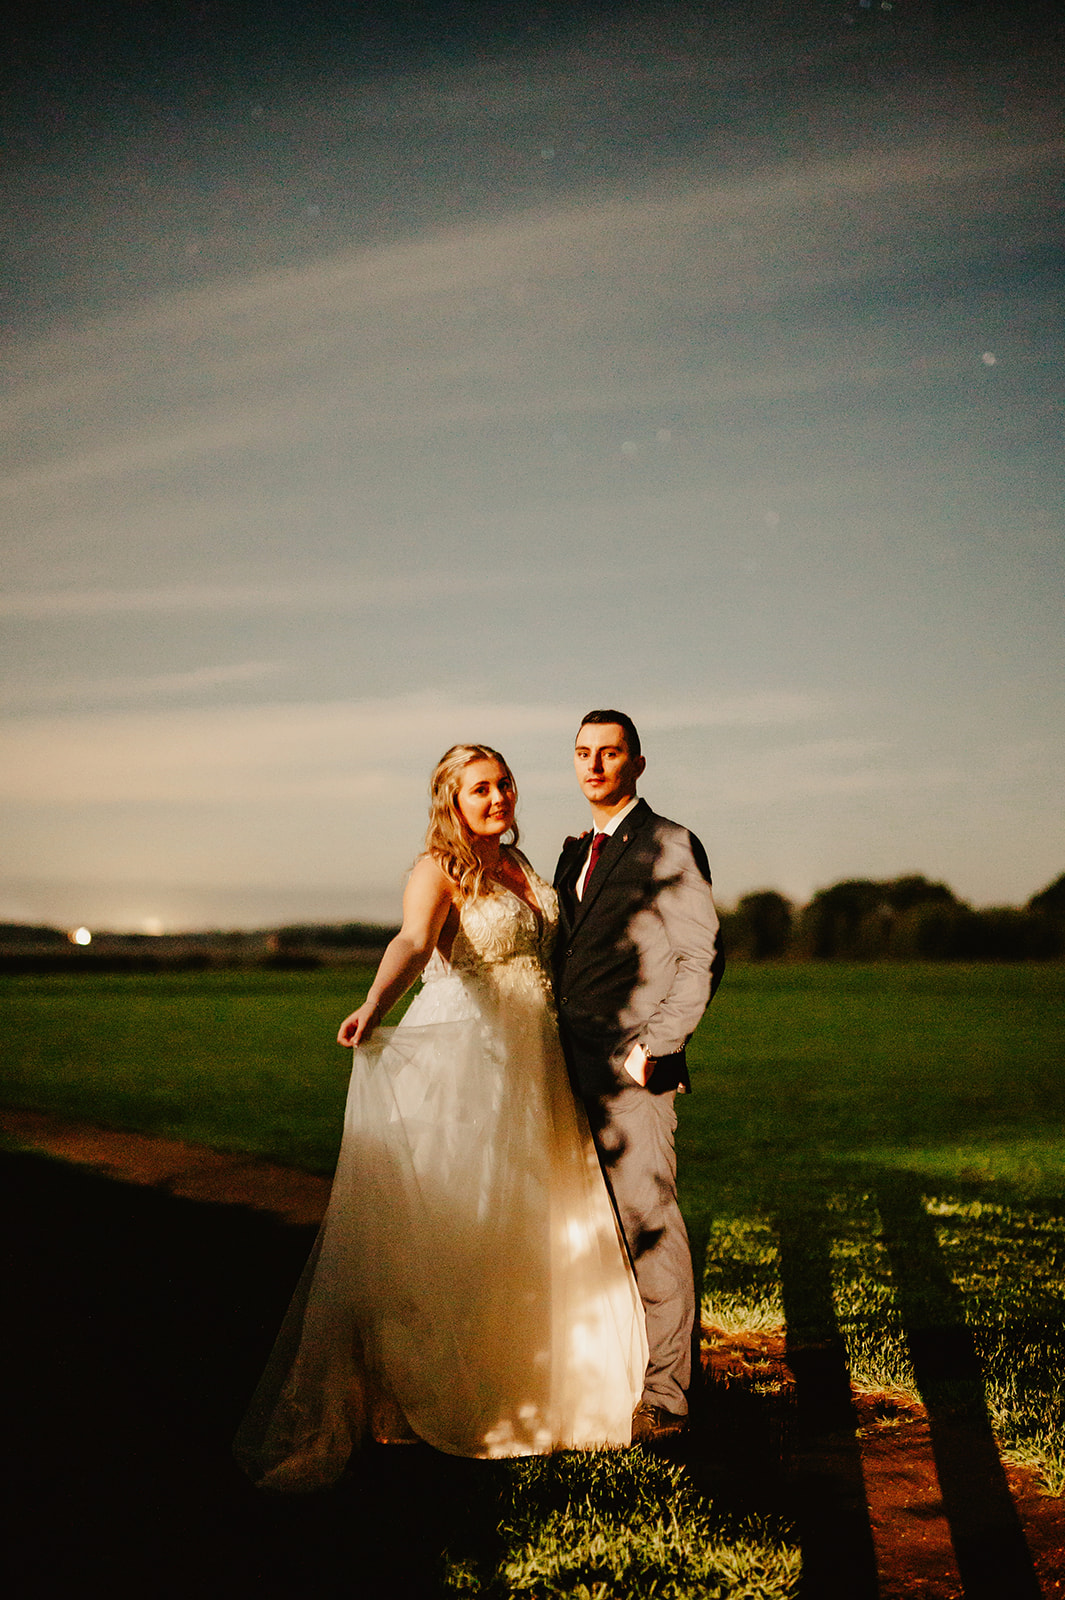 lowlight wedding portrait at pentney abbey with the stars in the sky